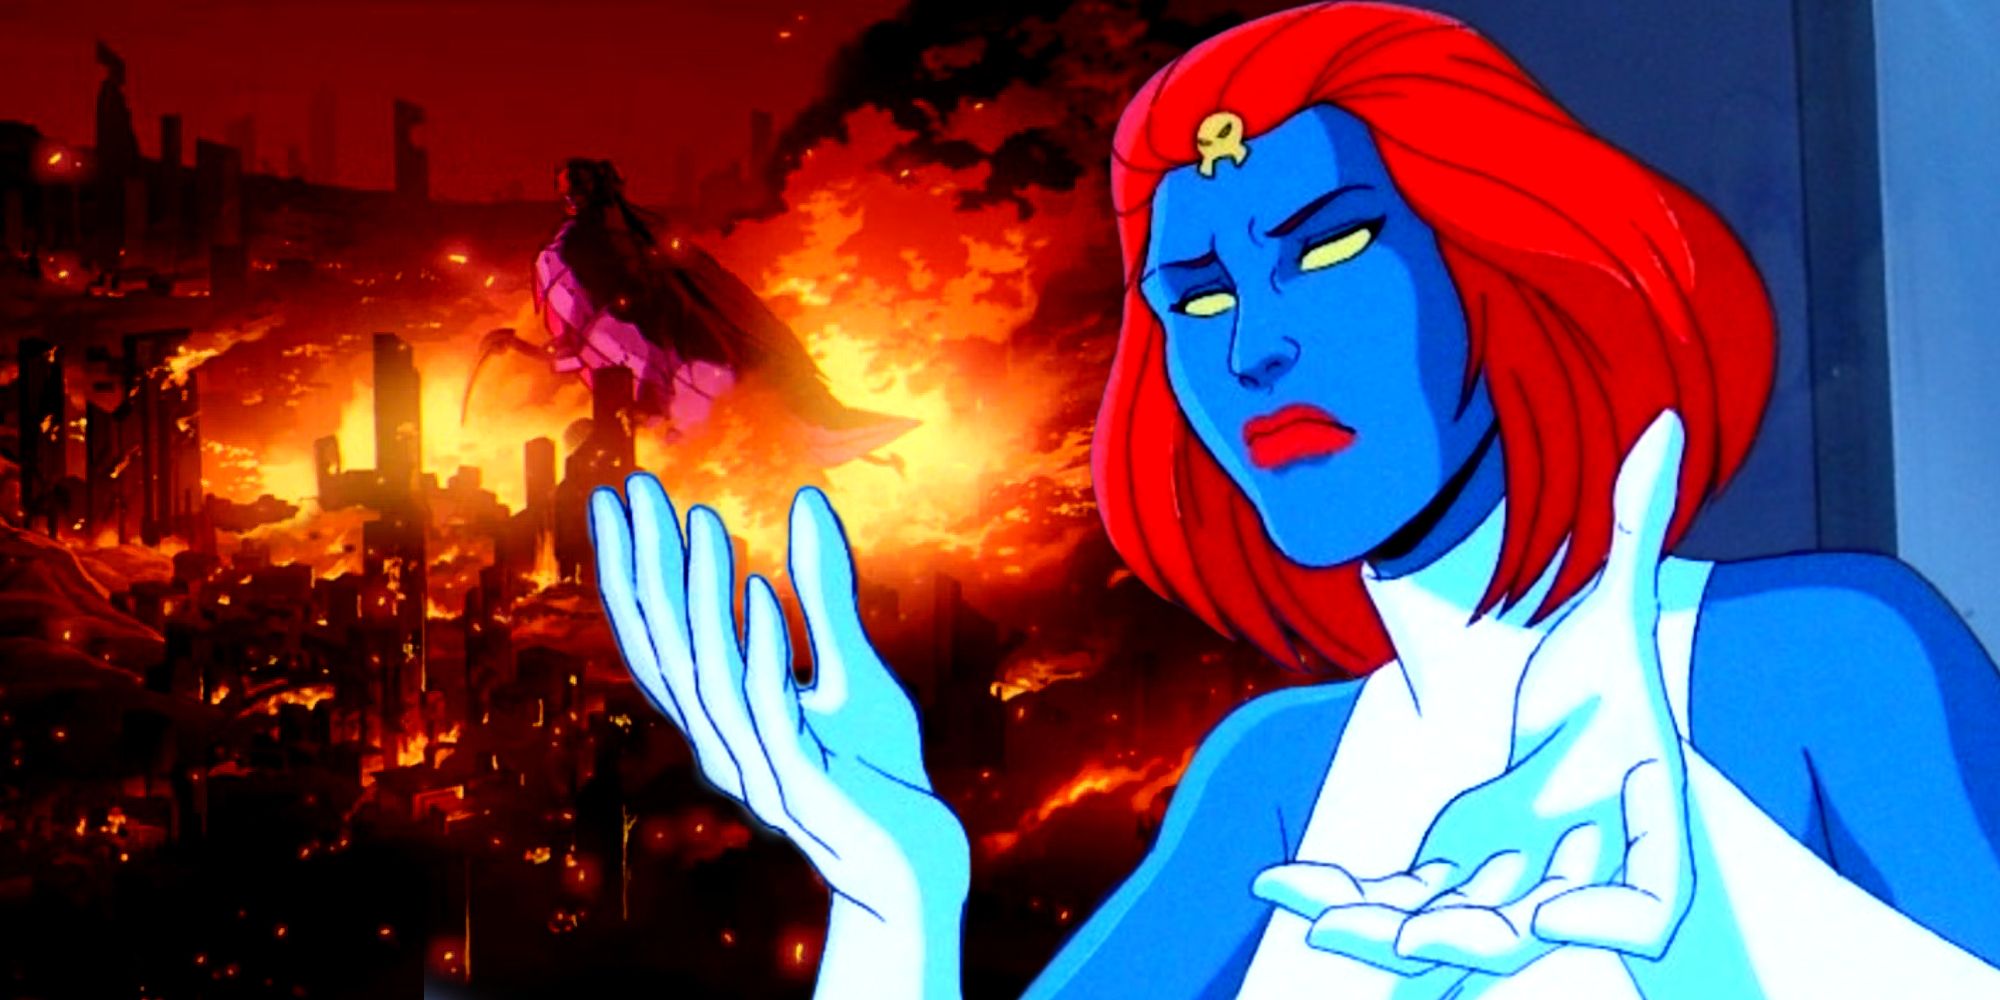 Genosha Destroyed in X-Men 97 Episode 5 and Mystique in The Animated Series